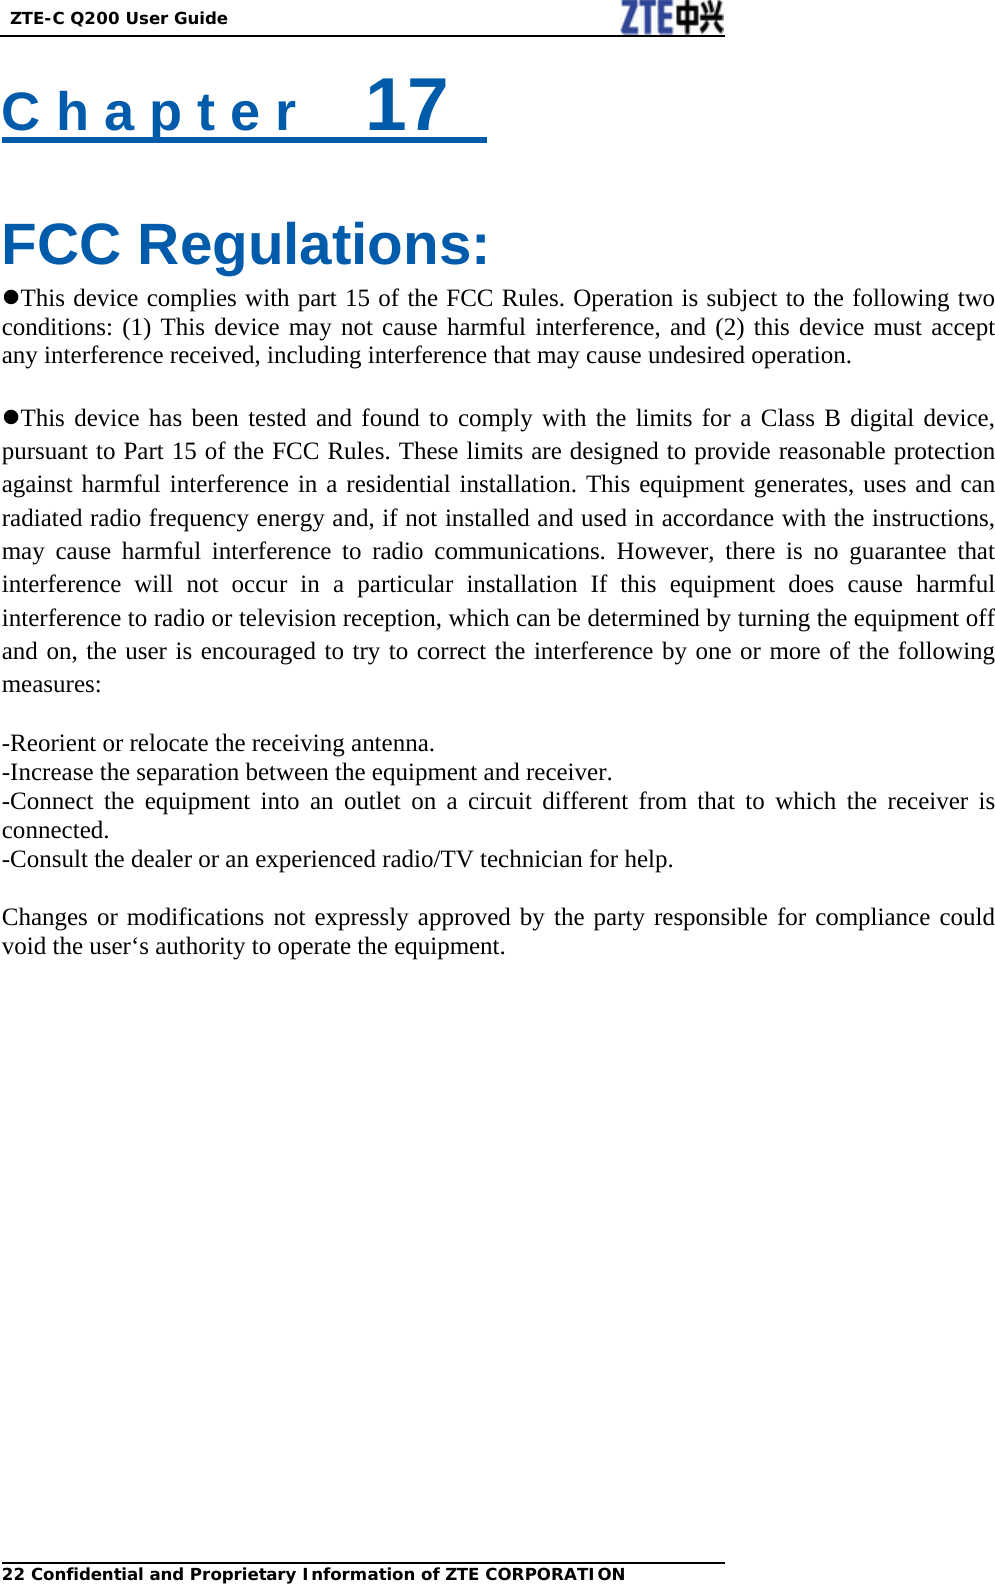  ZTE-C Q200 User Guide 22 Confidential and Proprietary Information of ZTE CORPORATIONC h a p t e r    17    FCC Regulations: This device complies with part 15 of the FCC Rules. Operation is subject to the following two conditions: (1) This device may not cause harmful interference, and (2) this device must accept any interference received, including interference that may cause undesired operation.  This device has been tested and found to comply with the limits for a Class B digital device, pursuant to Part 15 of the FCC Rules. These limits are designed to provide reasonable protection against harmful interference in a residential installation. This equipment generates, uses and can radiated radio frequency energy and, if not installed and used in accordance with the instructions, may cause harmful interference to radio communications. However, there is no guarantee that interference will not occur in a particular installation If this equipment does cause harmful interference to radio or television reception, which can be determined by turning the equipment off and on, the user is encouraged to try to correct the interference by one or more of the following measures:  -Reorient or relocate the receiving antenna. -Increase the separation between the equipment and receiver. -Connect the equipment into an outlet on a circuit different from that to which the receiver is connected. -Consult the dealer or an experienced radio/TV technician for help.  Changes or modifications not expressly approved by the party responsible for compliance could void the user‘s authority to operate the equipment.  